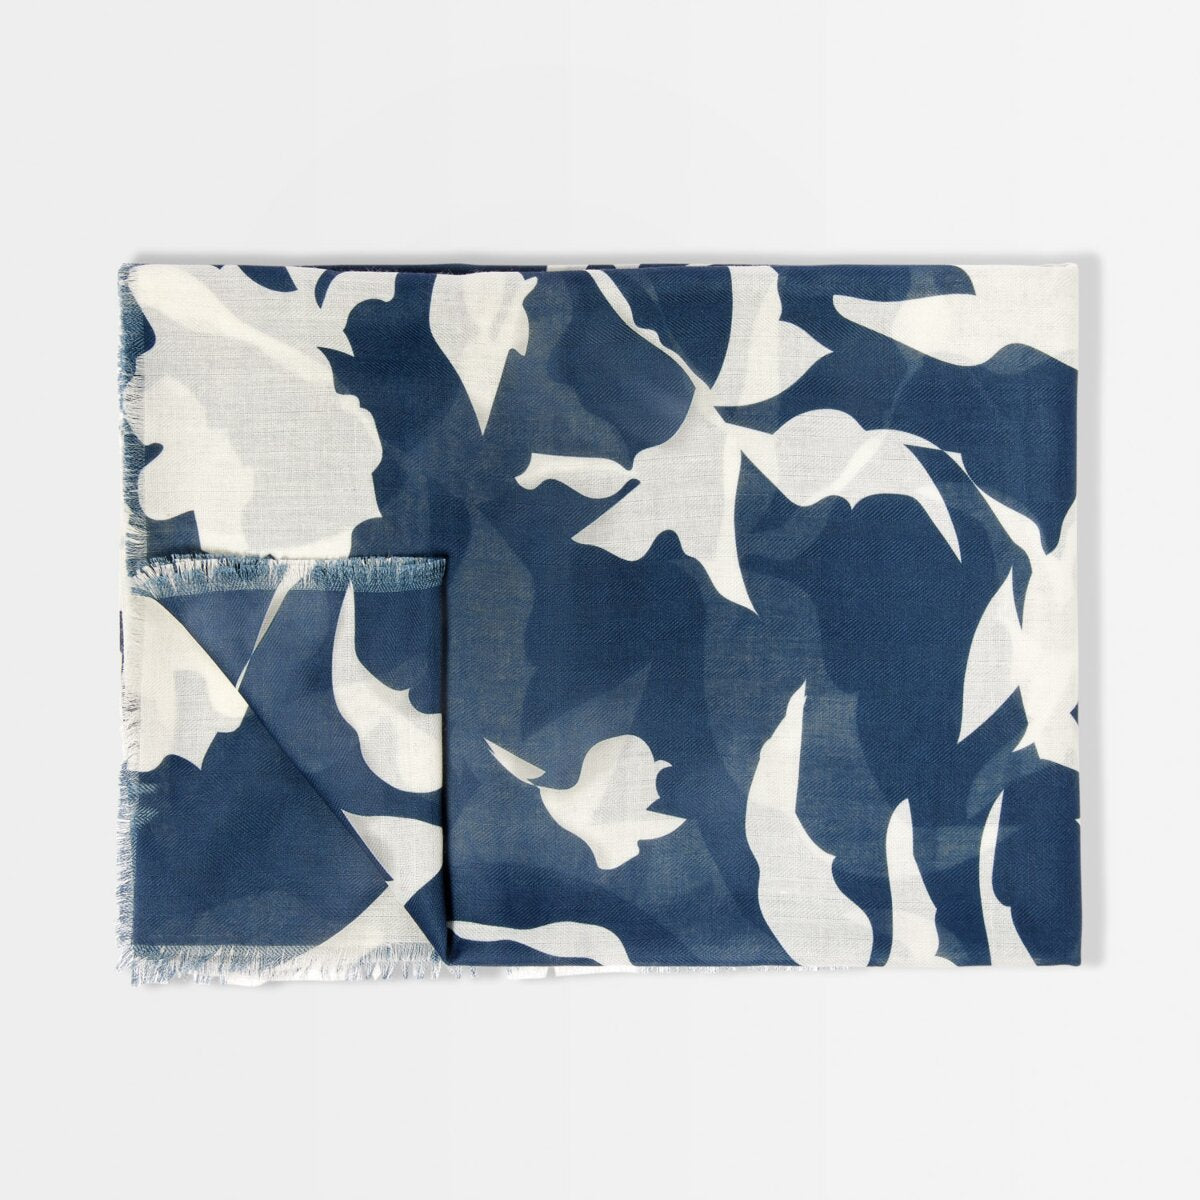 Navy abstract flower scarf